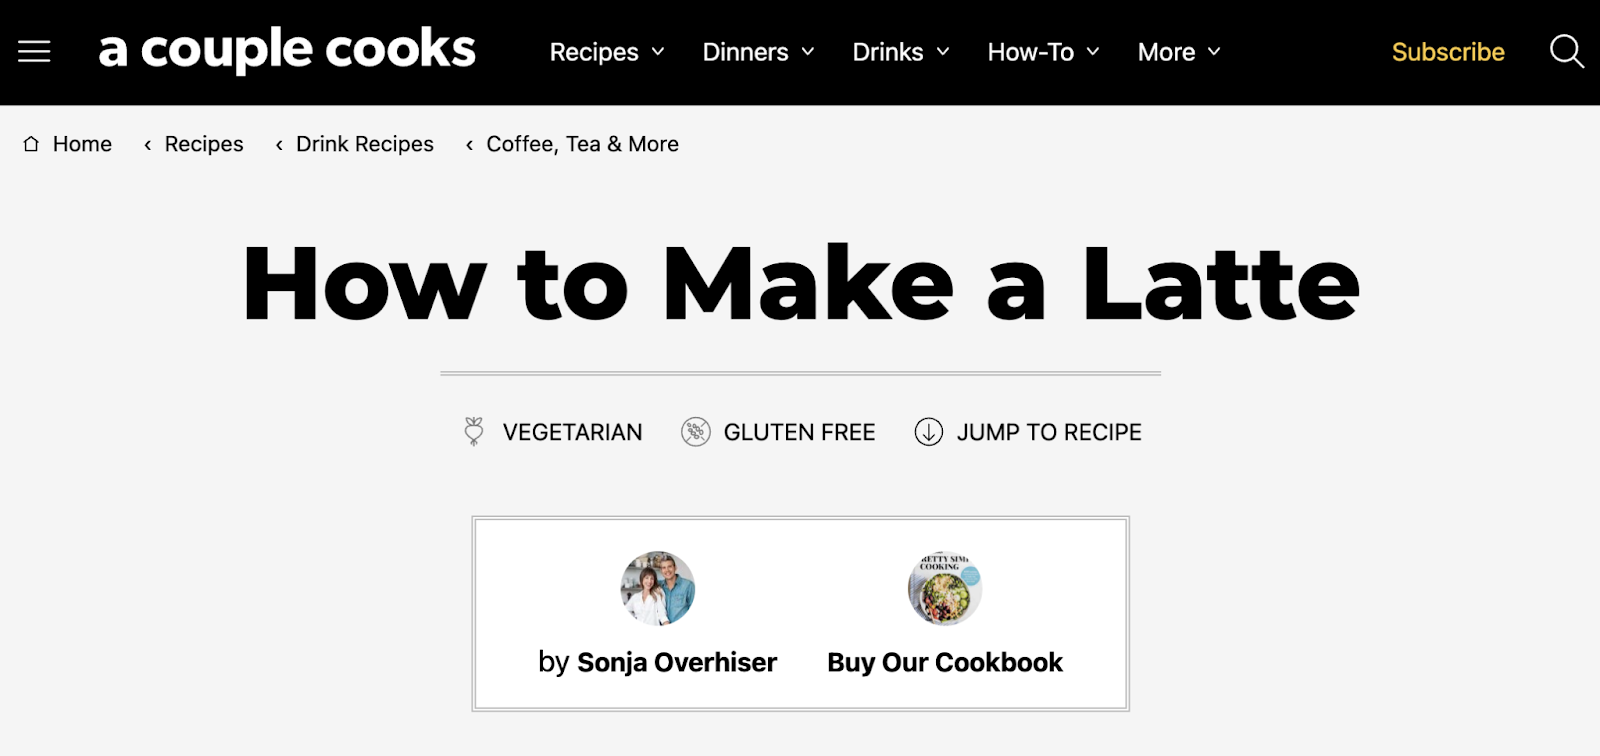 "How to Make a Latte" H1 from a mates  cooks's article